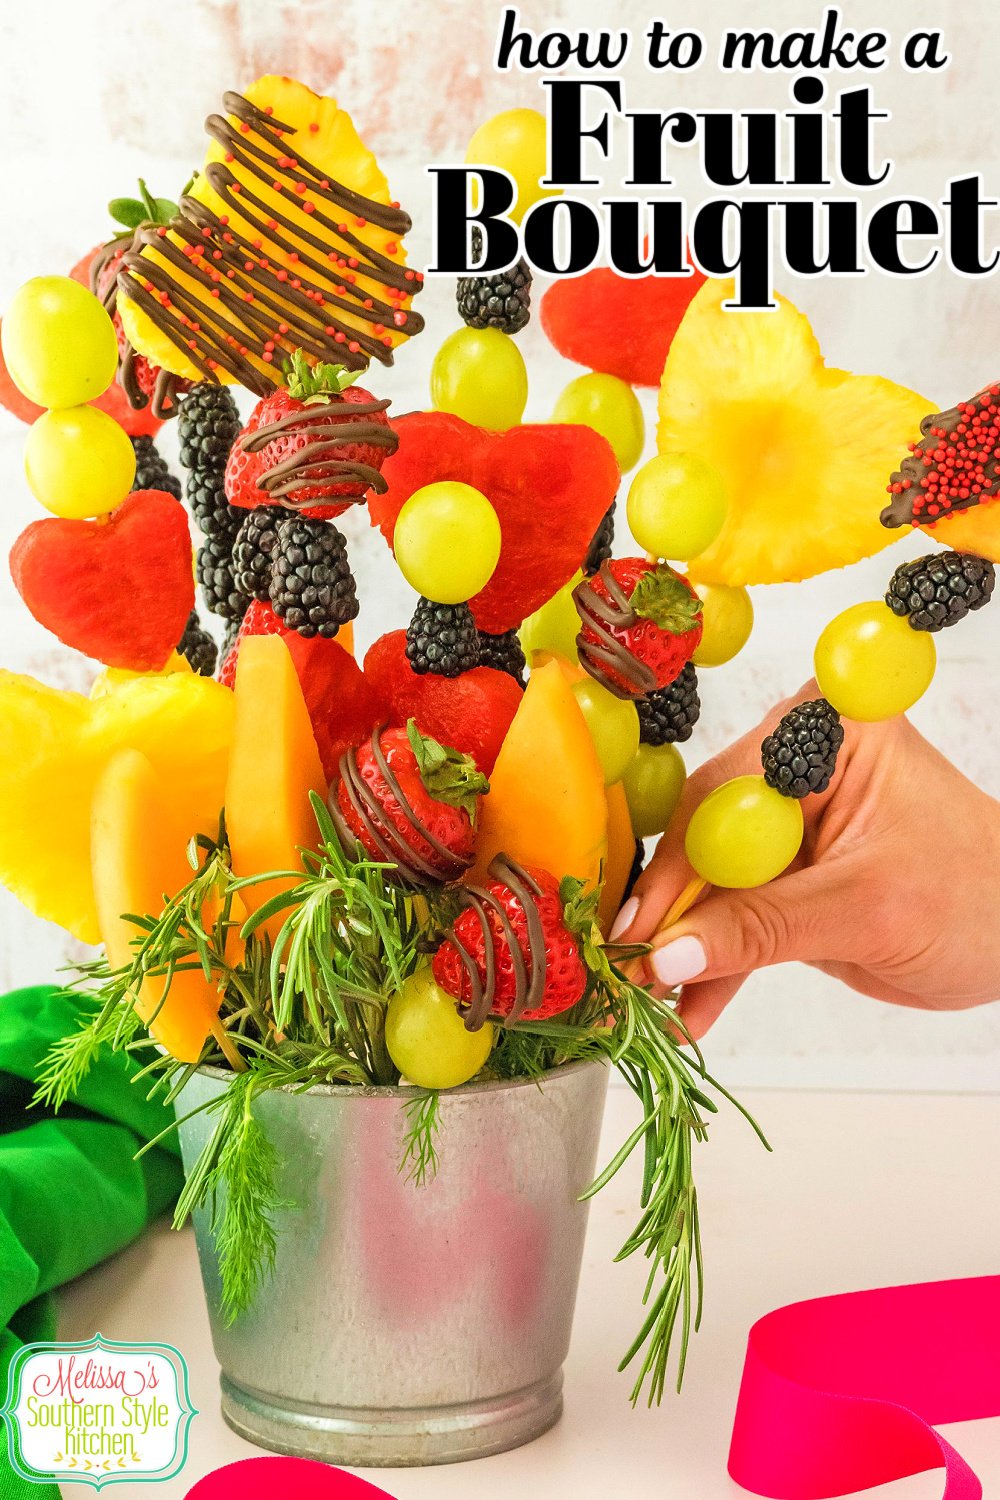 Share this Fruit Bouquet with the special people in your lives #fruitbouquet #howtomakeafruitbouquet #bestfruitbouquets #Valentinedaydesserts #valentinesdaygifts #freshfruit #fruit #fruitrecipes #dessert #dessertrecipes #homemadegifts via @melissasssk